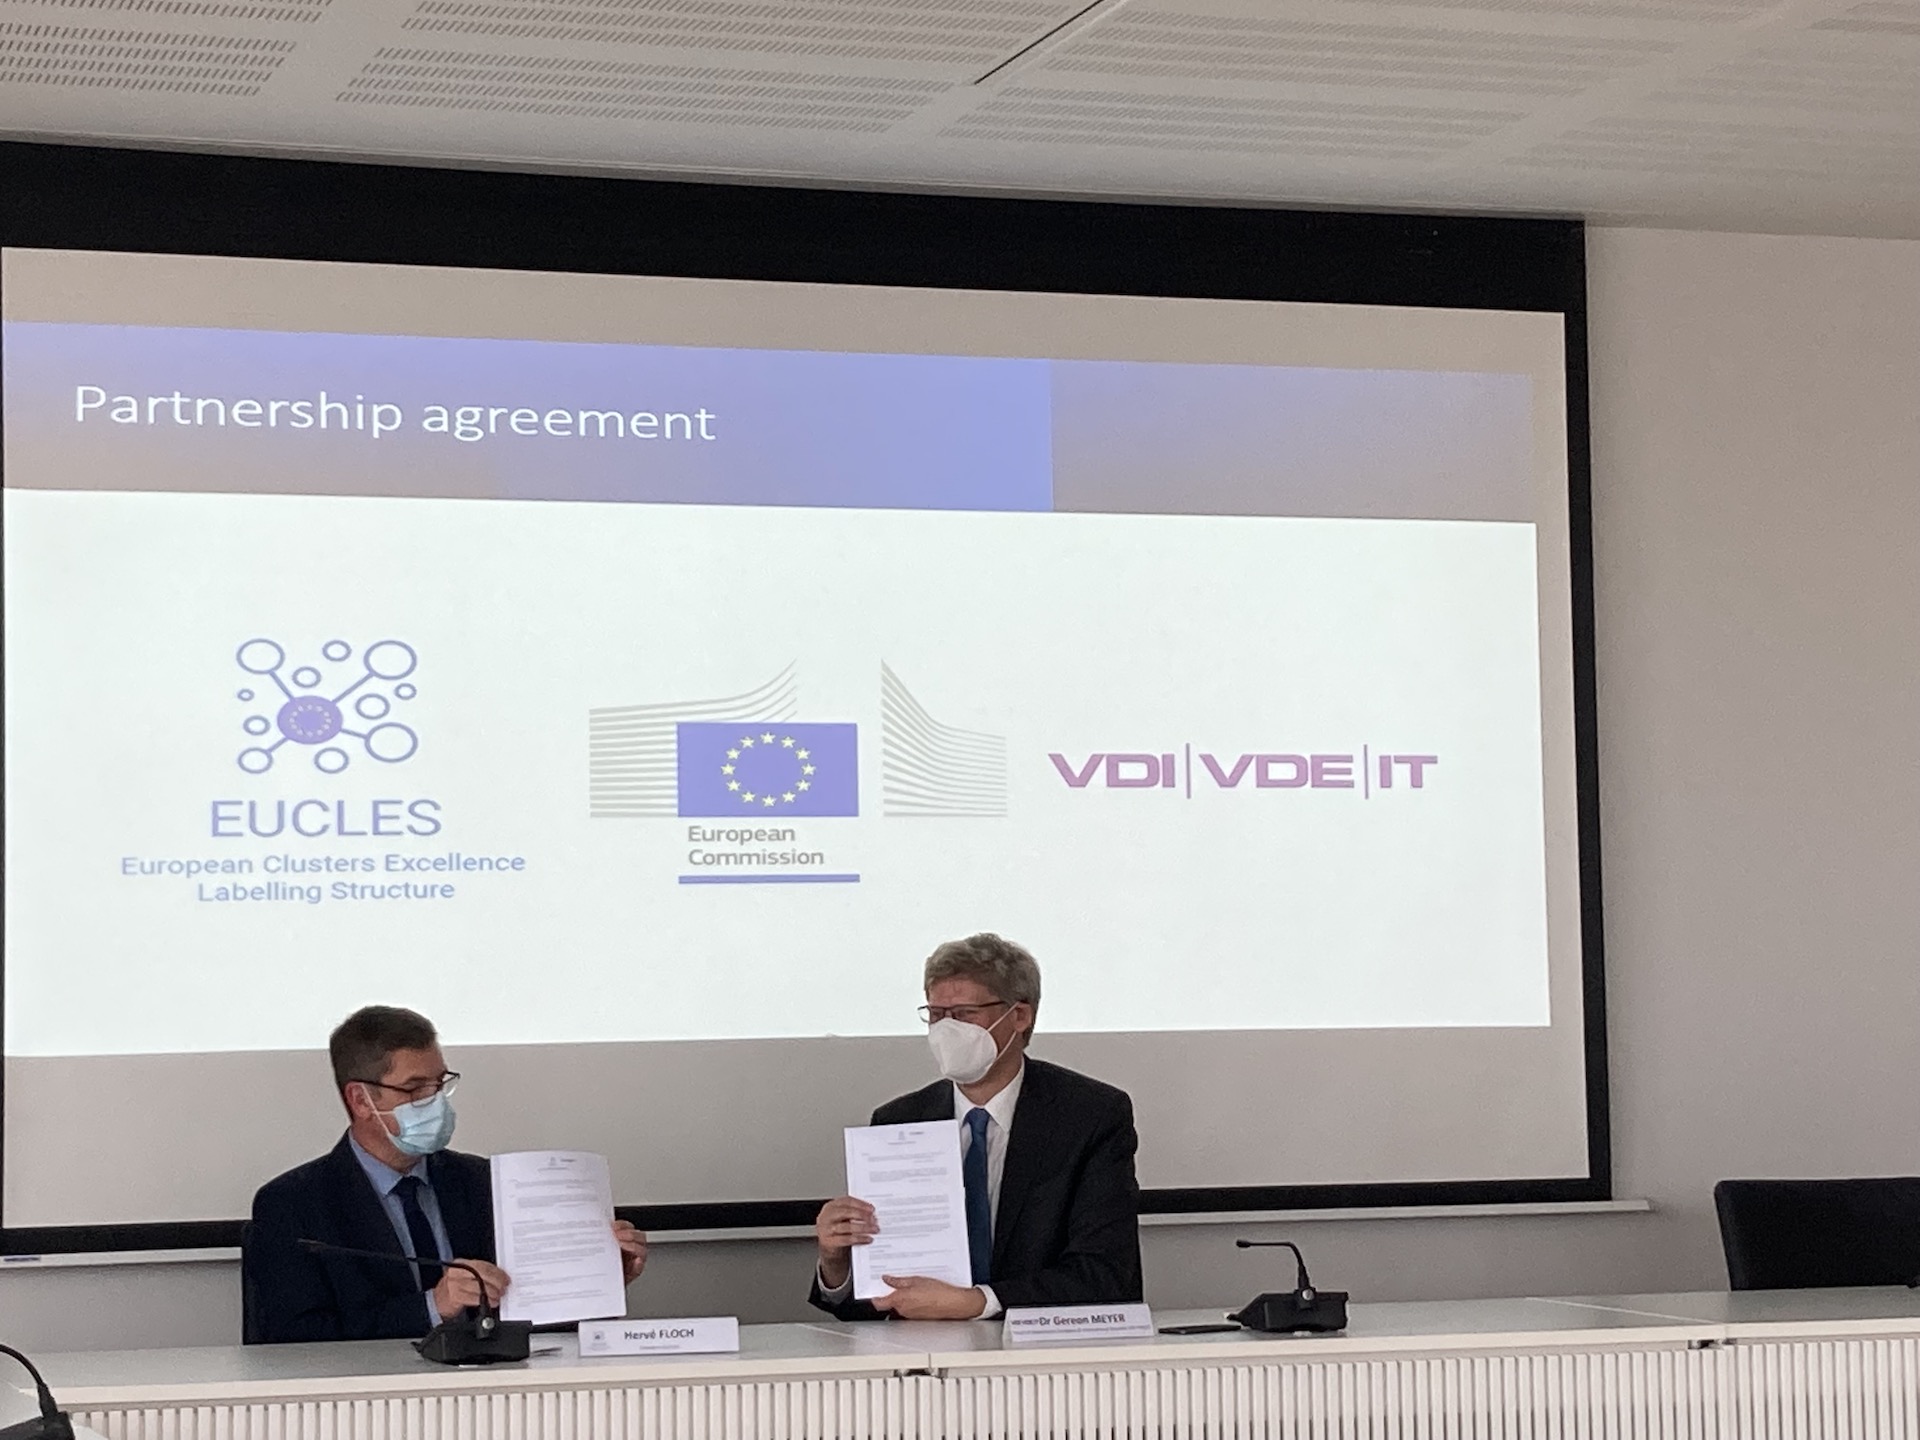 EUCLES signed a partnership with VDI/VDE-IT